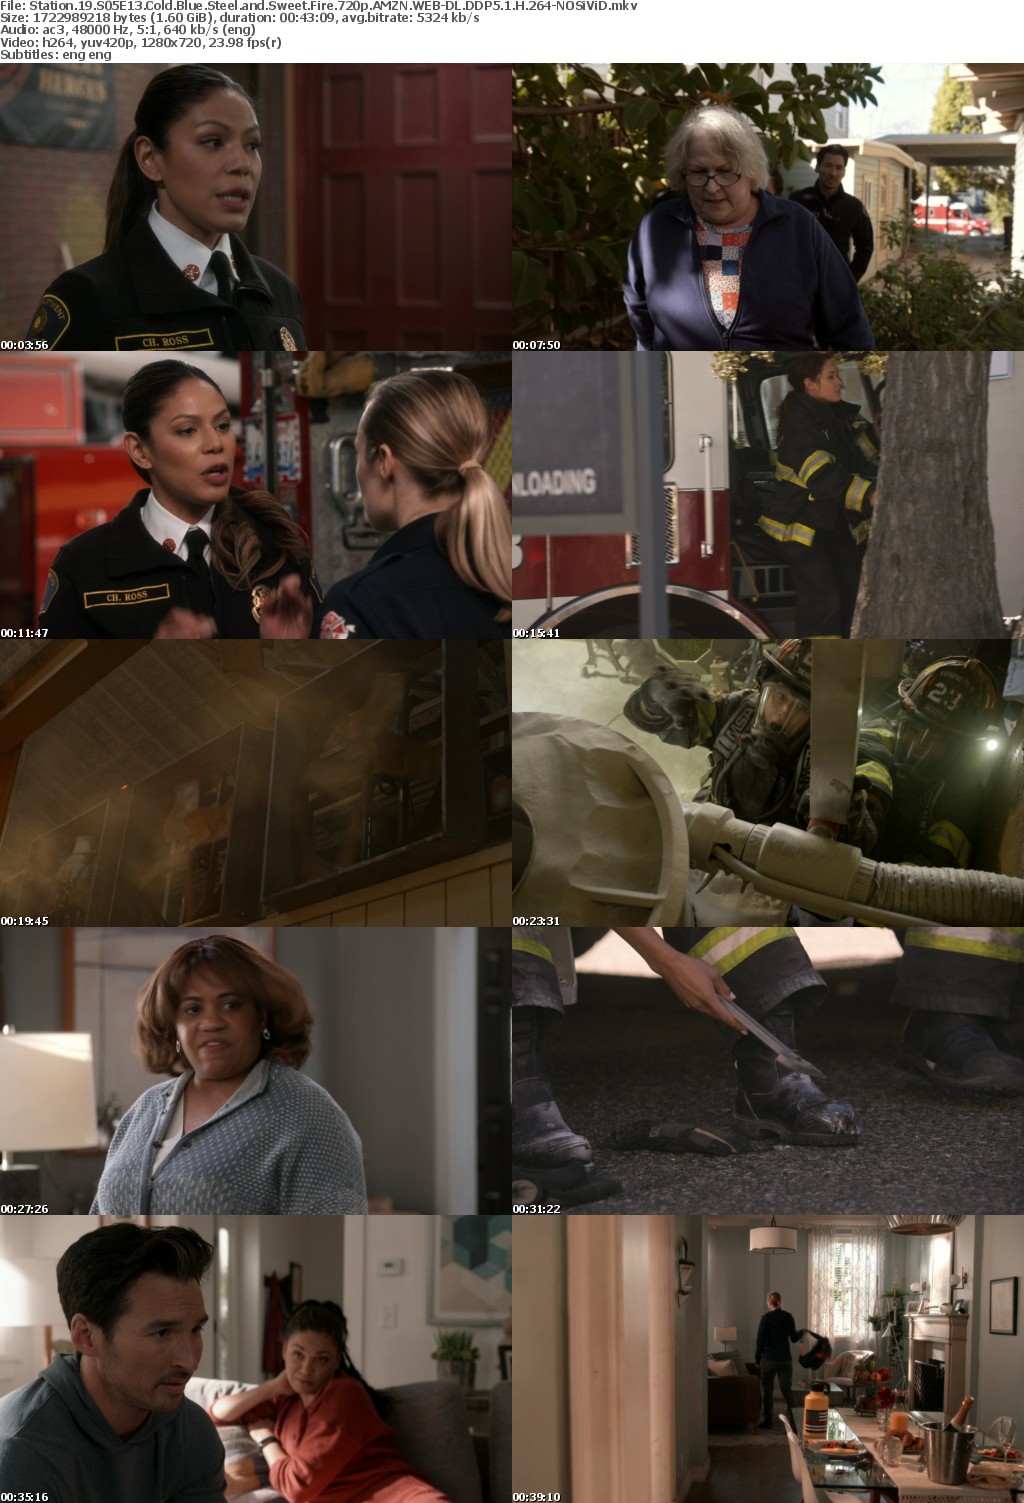 Station 19 S05E13 Cold Blue Steel and Sweet Fire 720p AMZN WEBRip DDP5 1 x264-NOSiViD